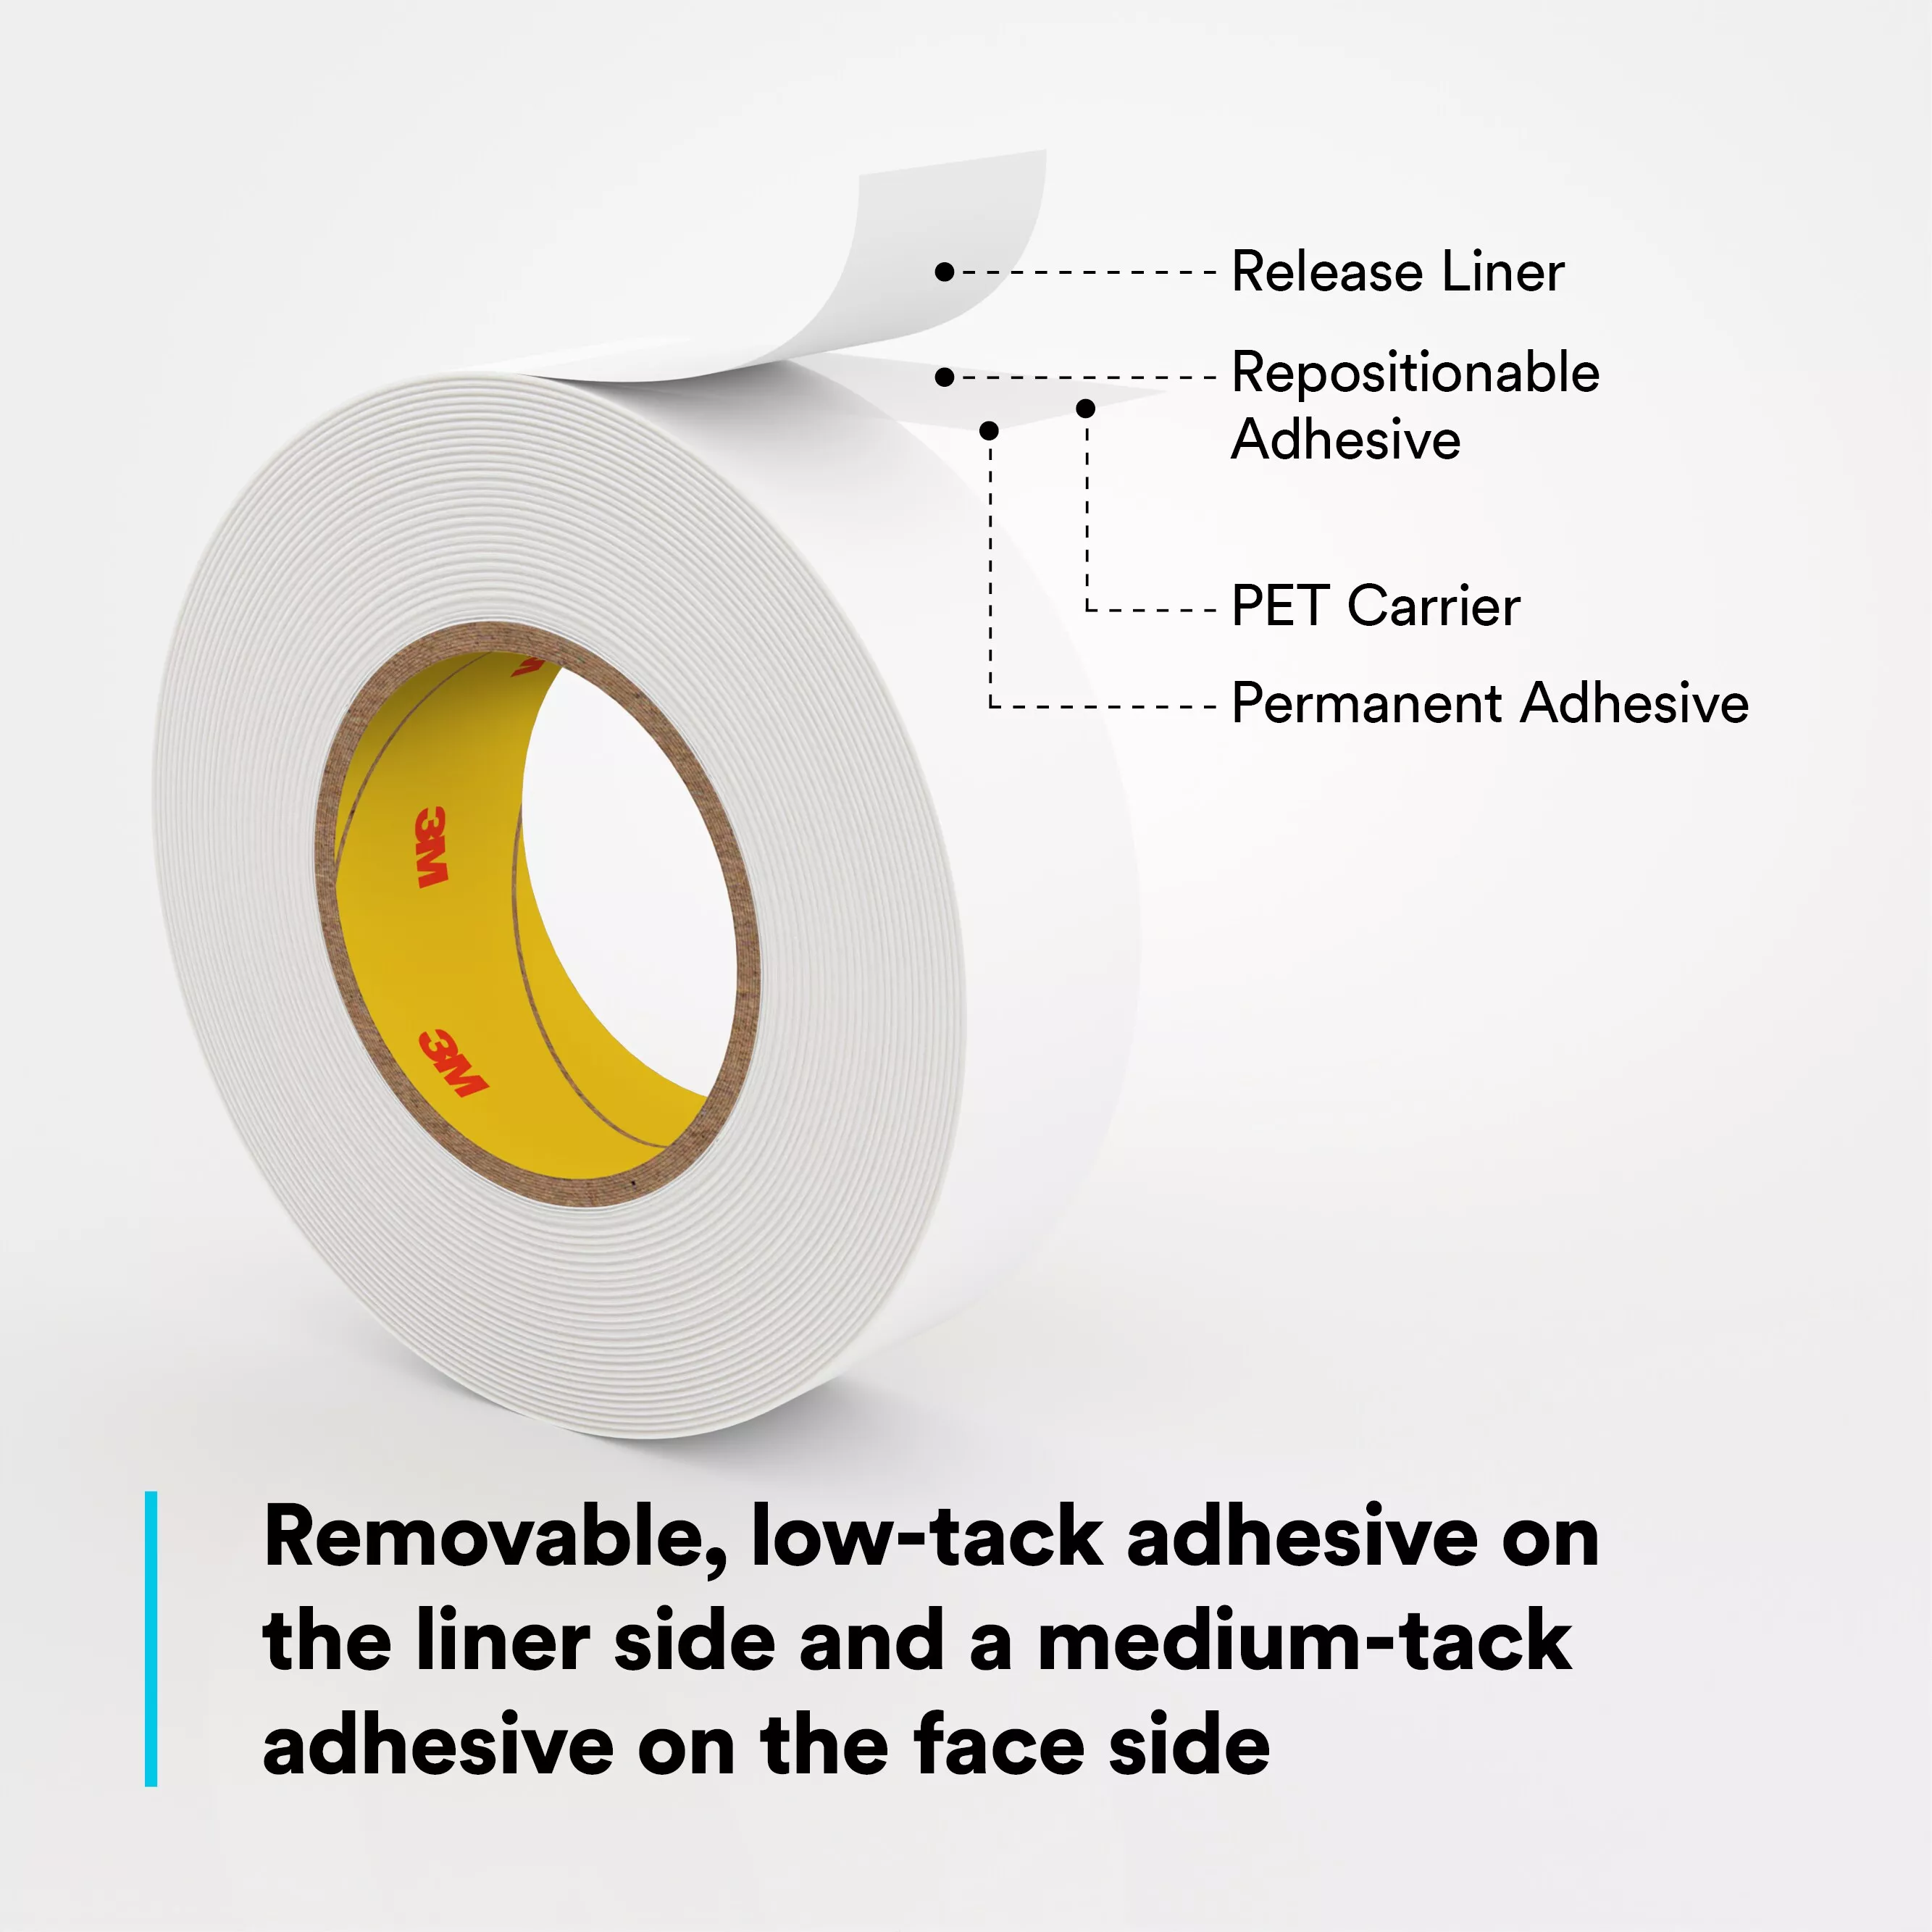 SKU 7010300200 | 3M™ Removable Repositionable Tape 9415PC